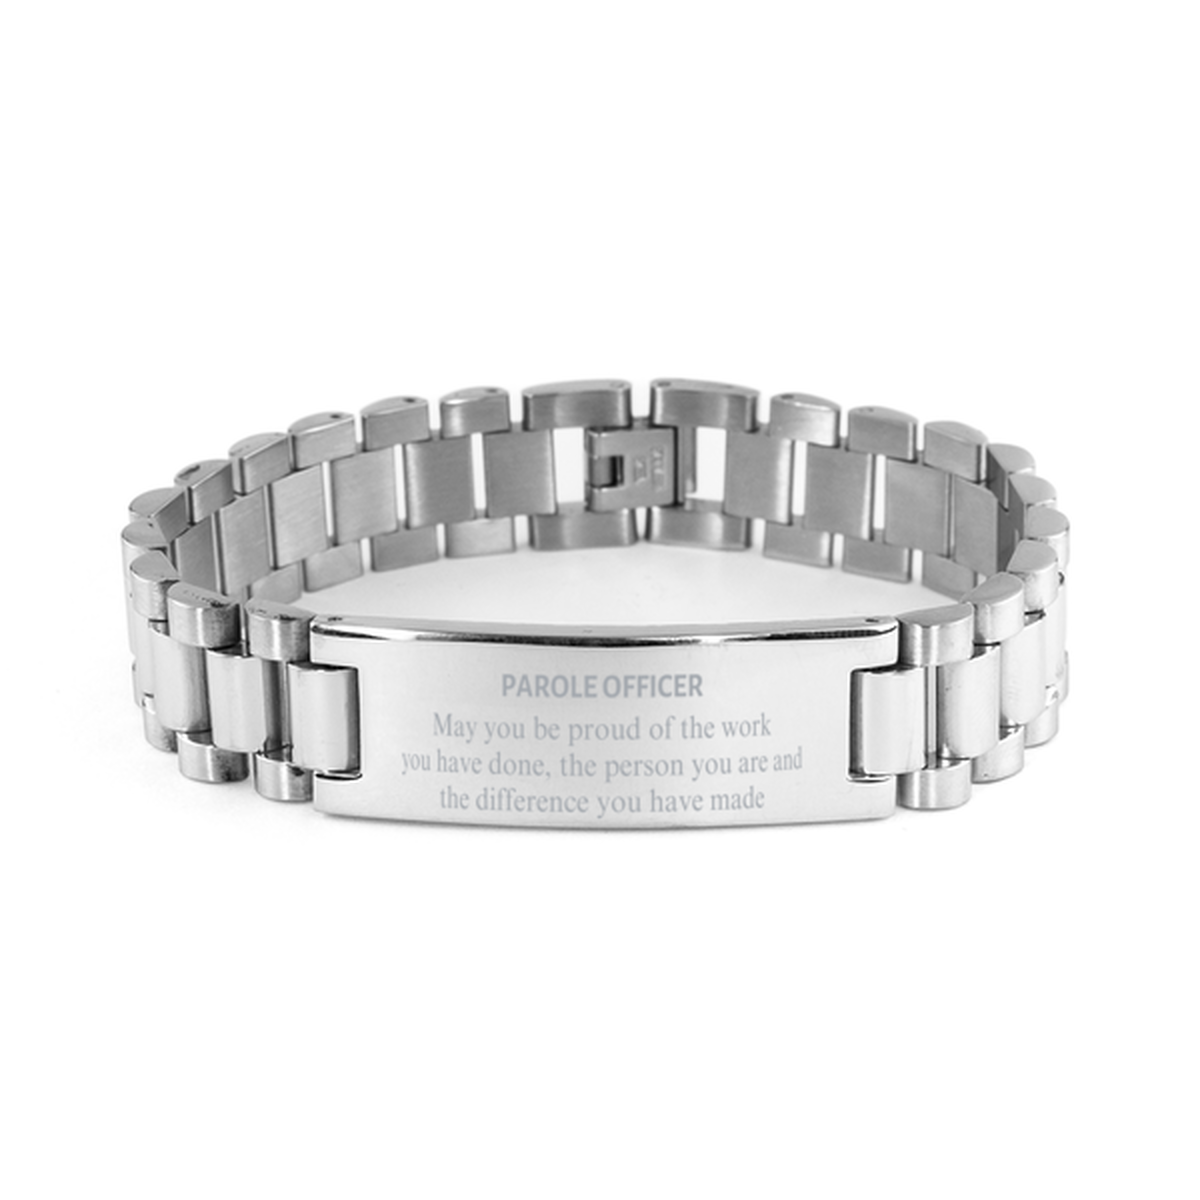 Parole Officer May you be proud of the work you have done, Retirement Parole Officer Ladder Stainless Steel Bracelet for Colleague Appreciation Gifts Amazing for Parole Officer